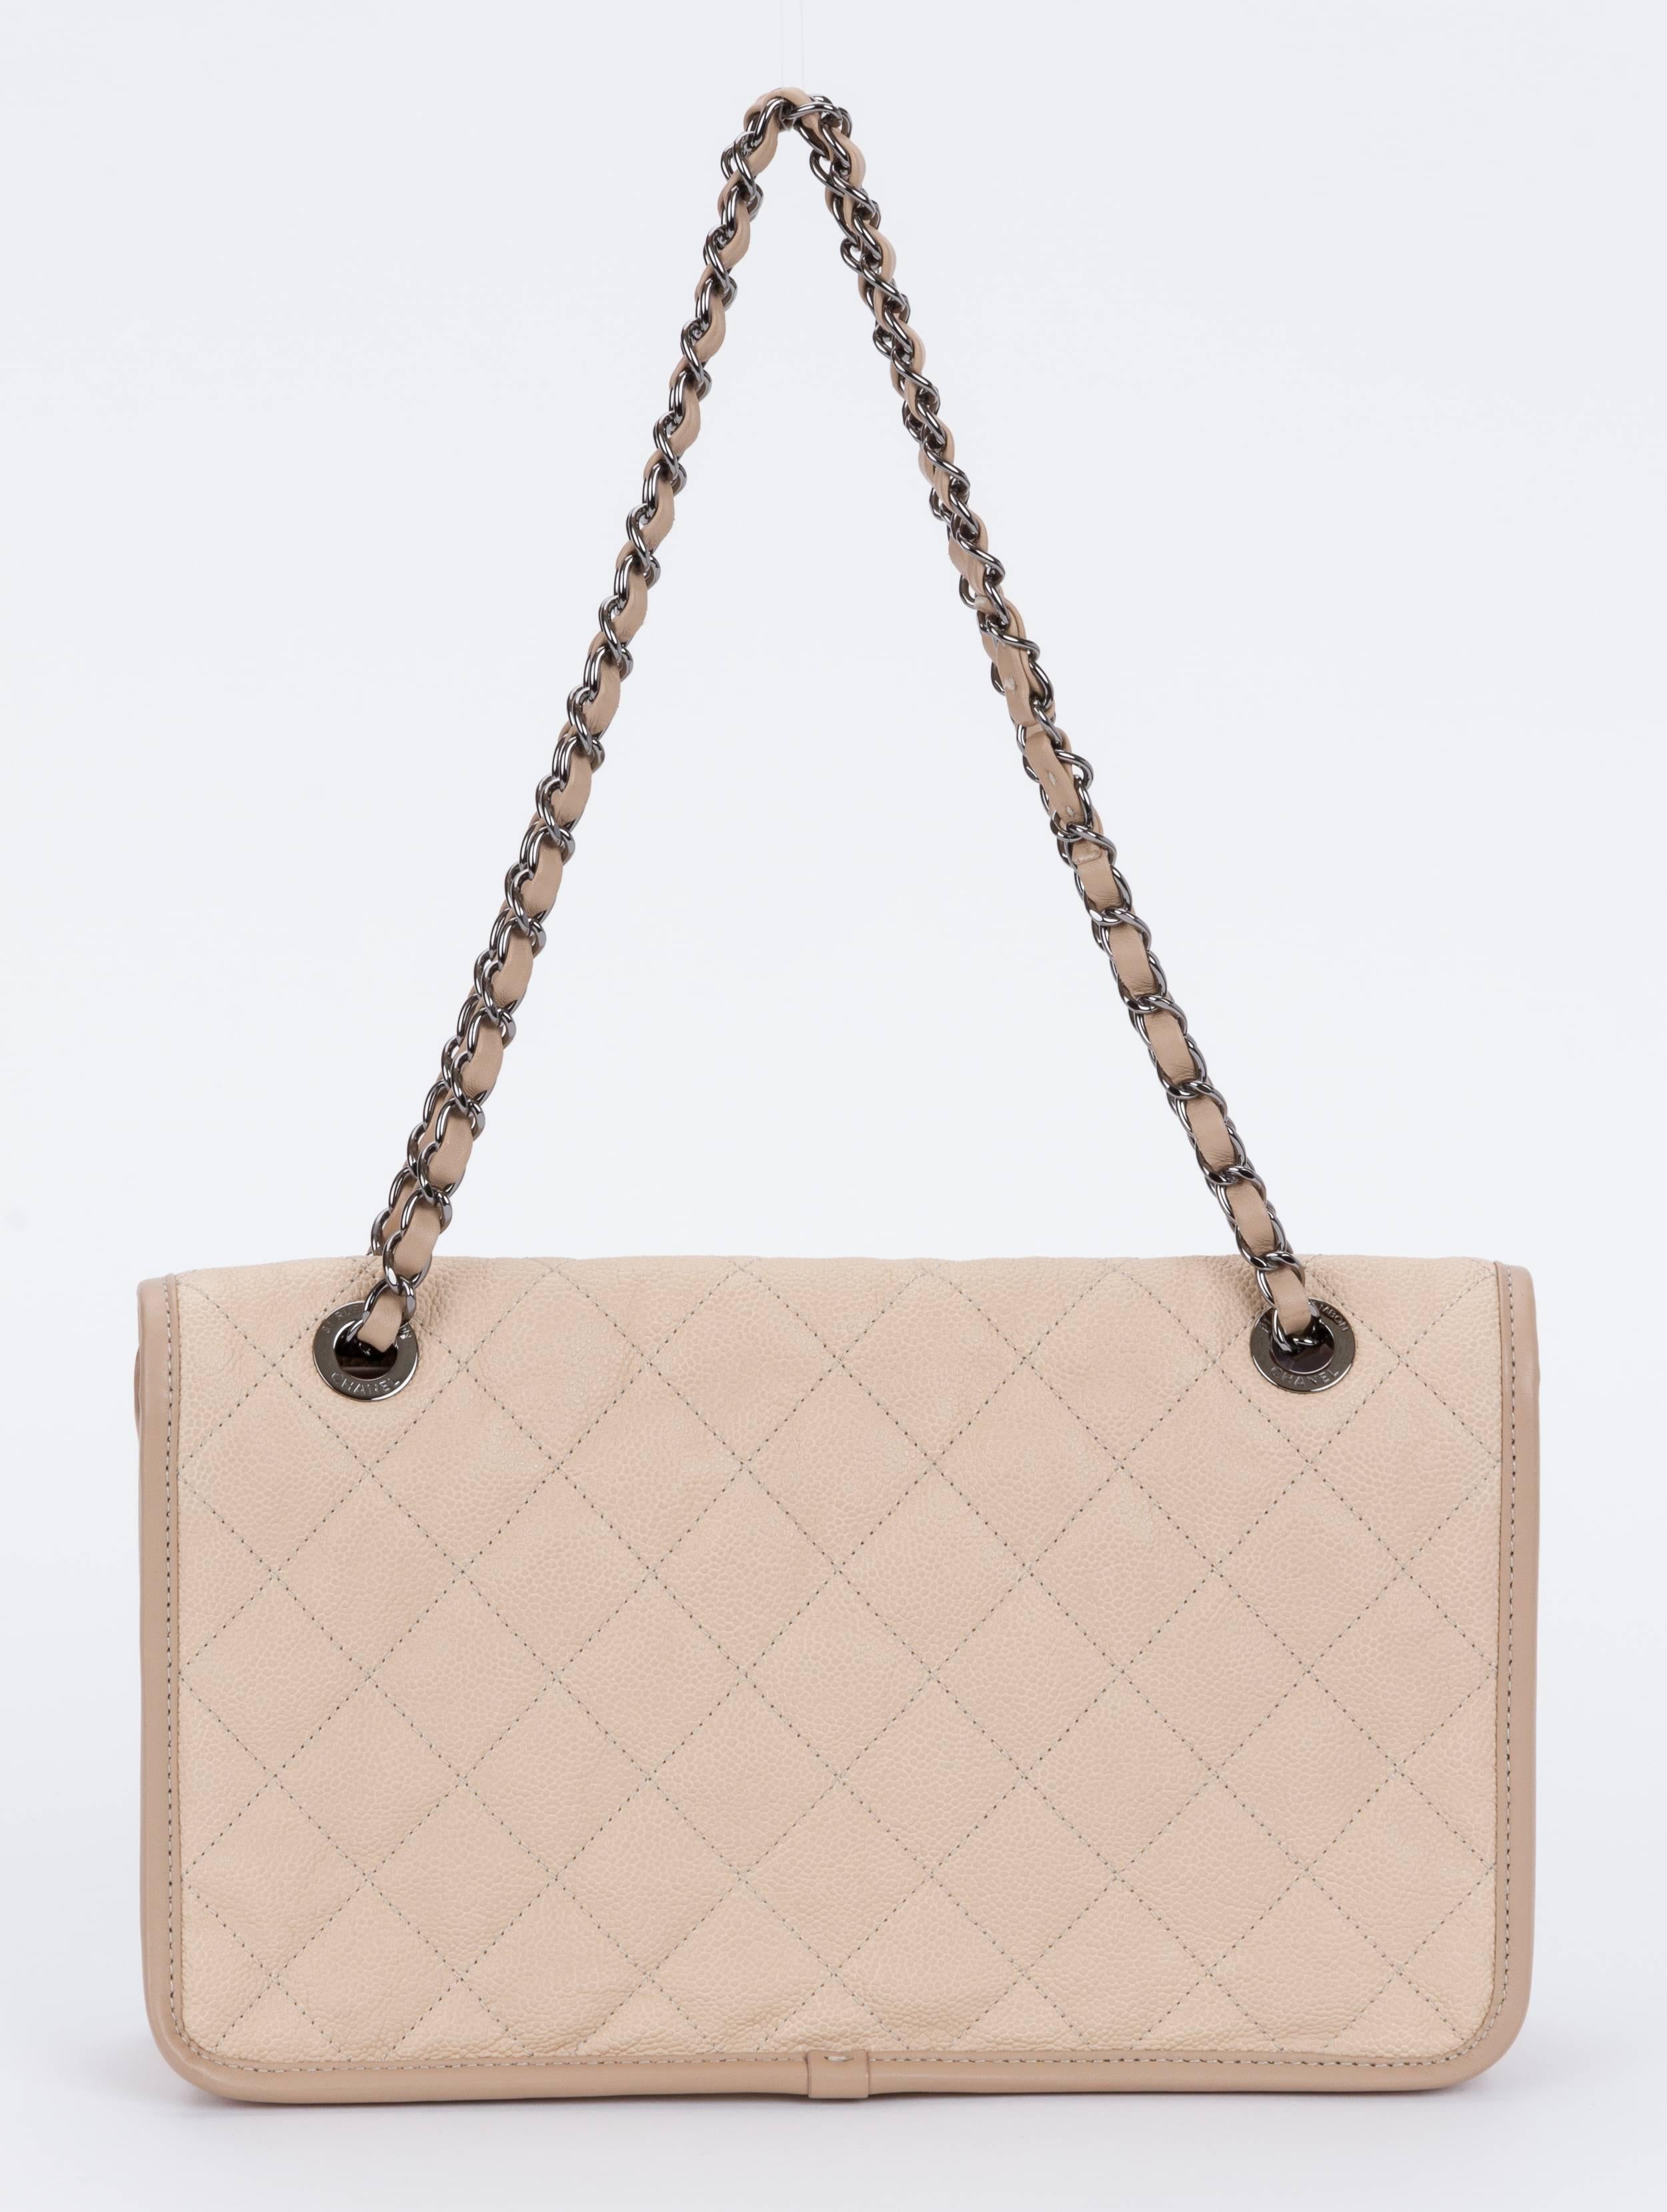 Chanel Beige Caviar Trimmed Jumbo Flap Bag In Excellent Condition In West Hollywood, CA